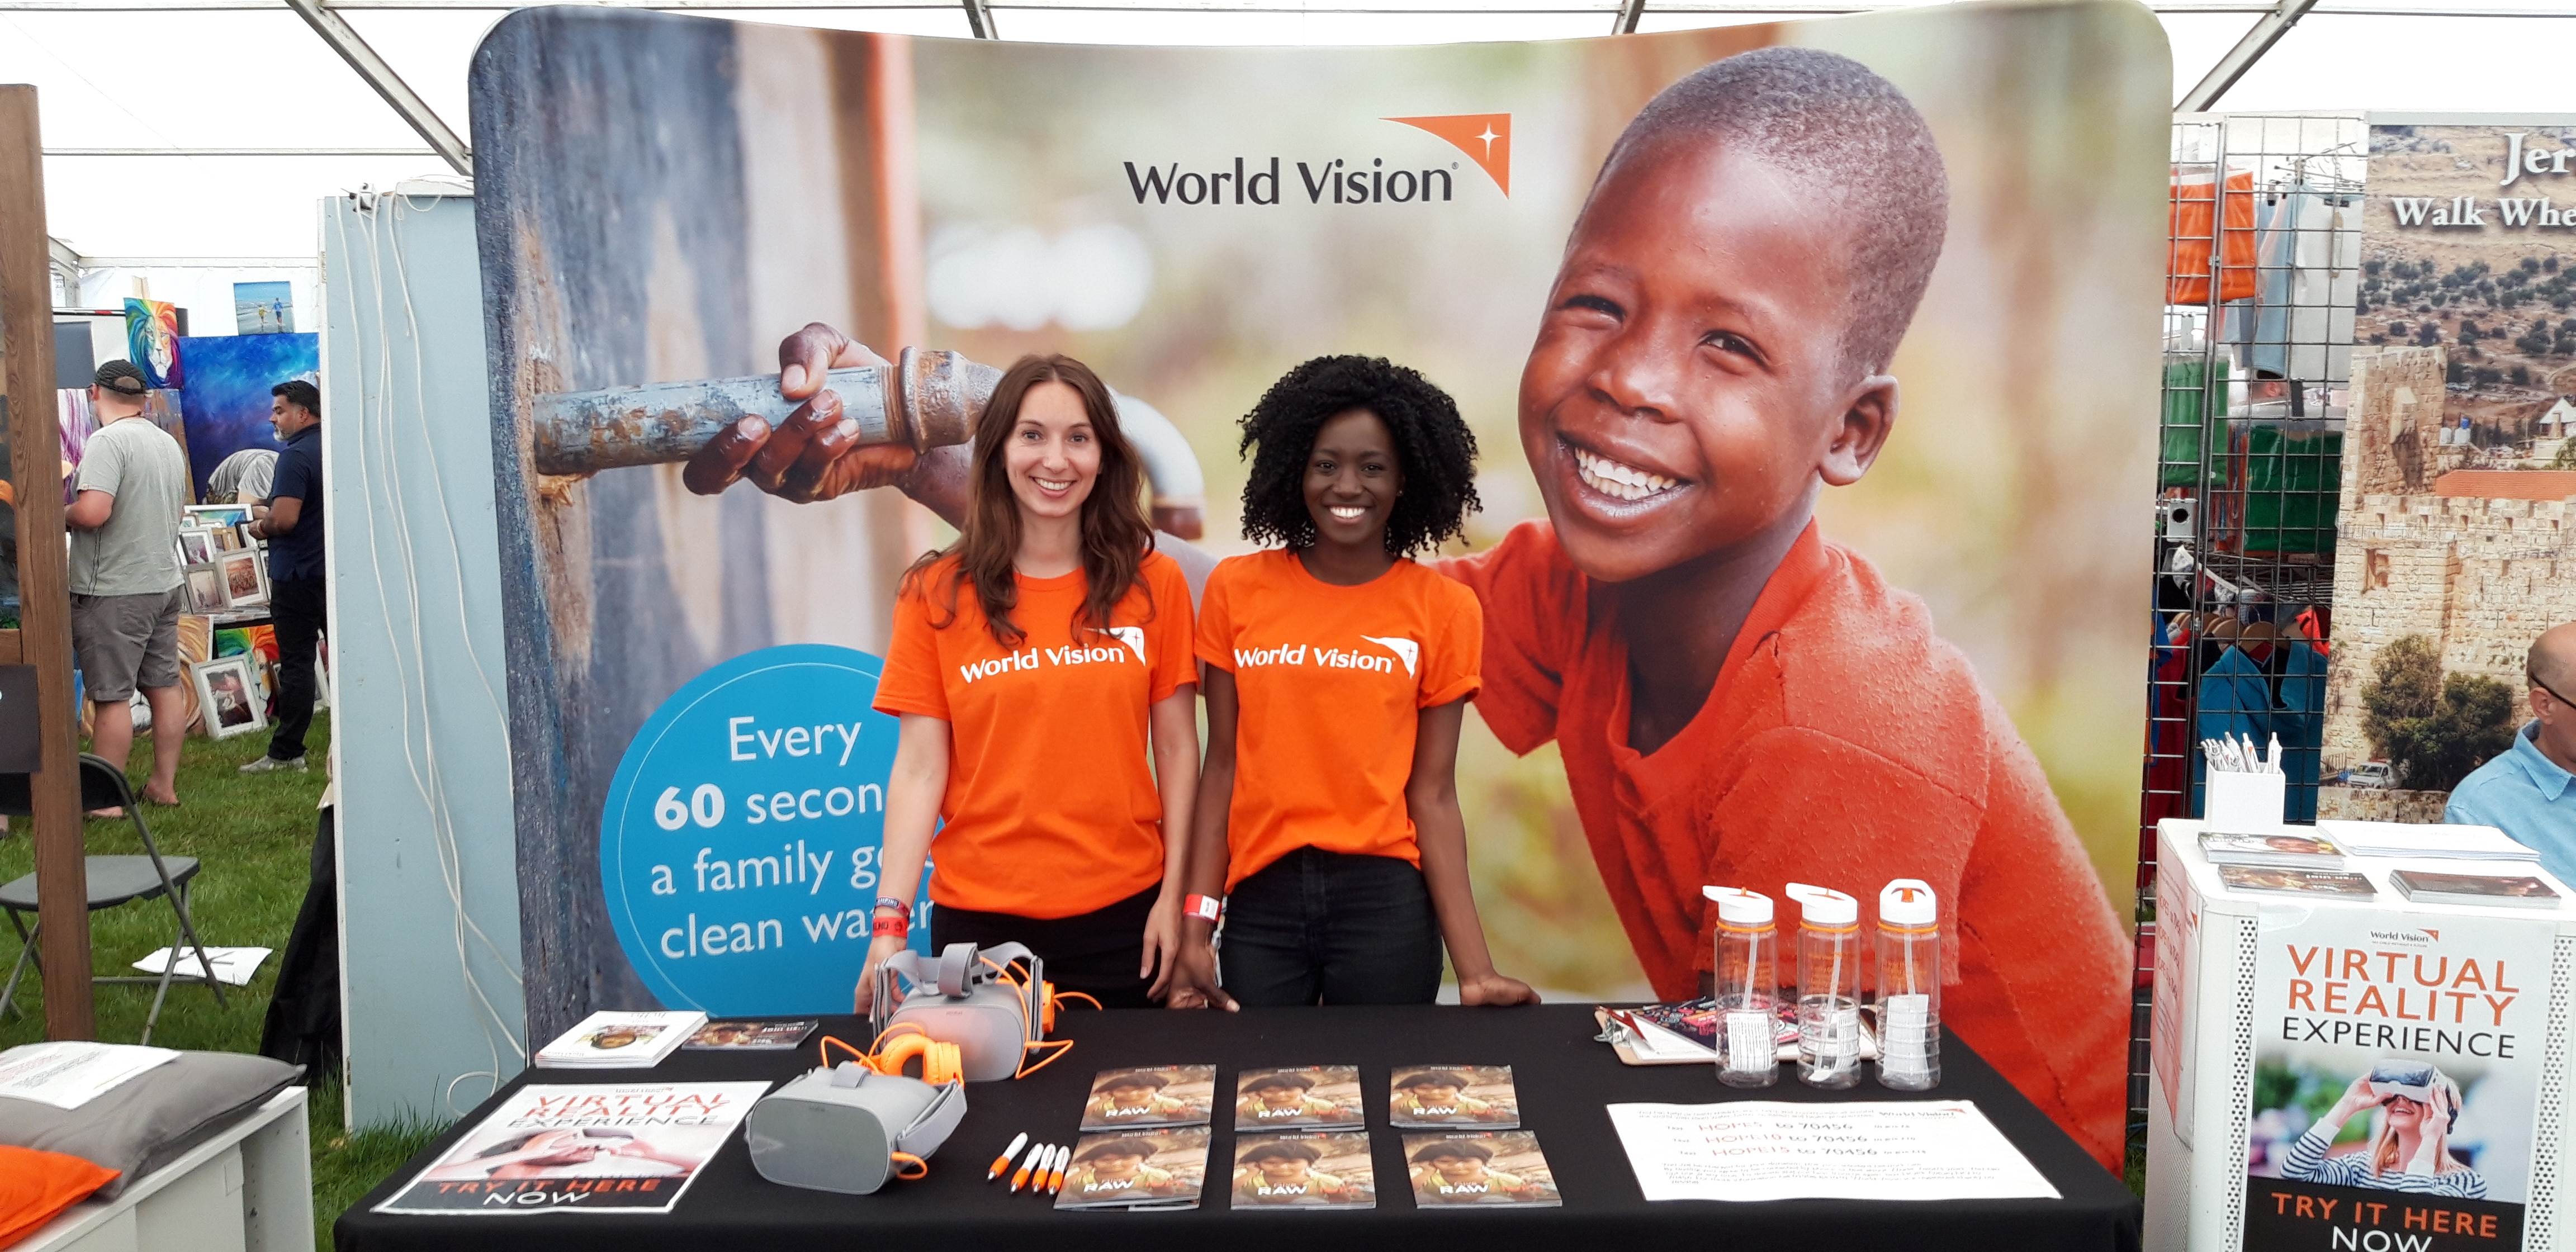 Two women stand at festival stall smiling in front of World Vision banner